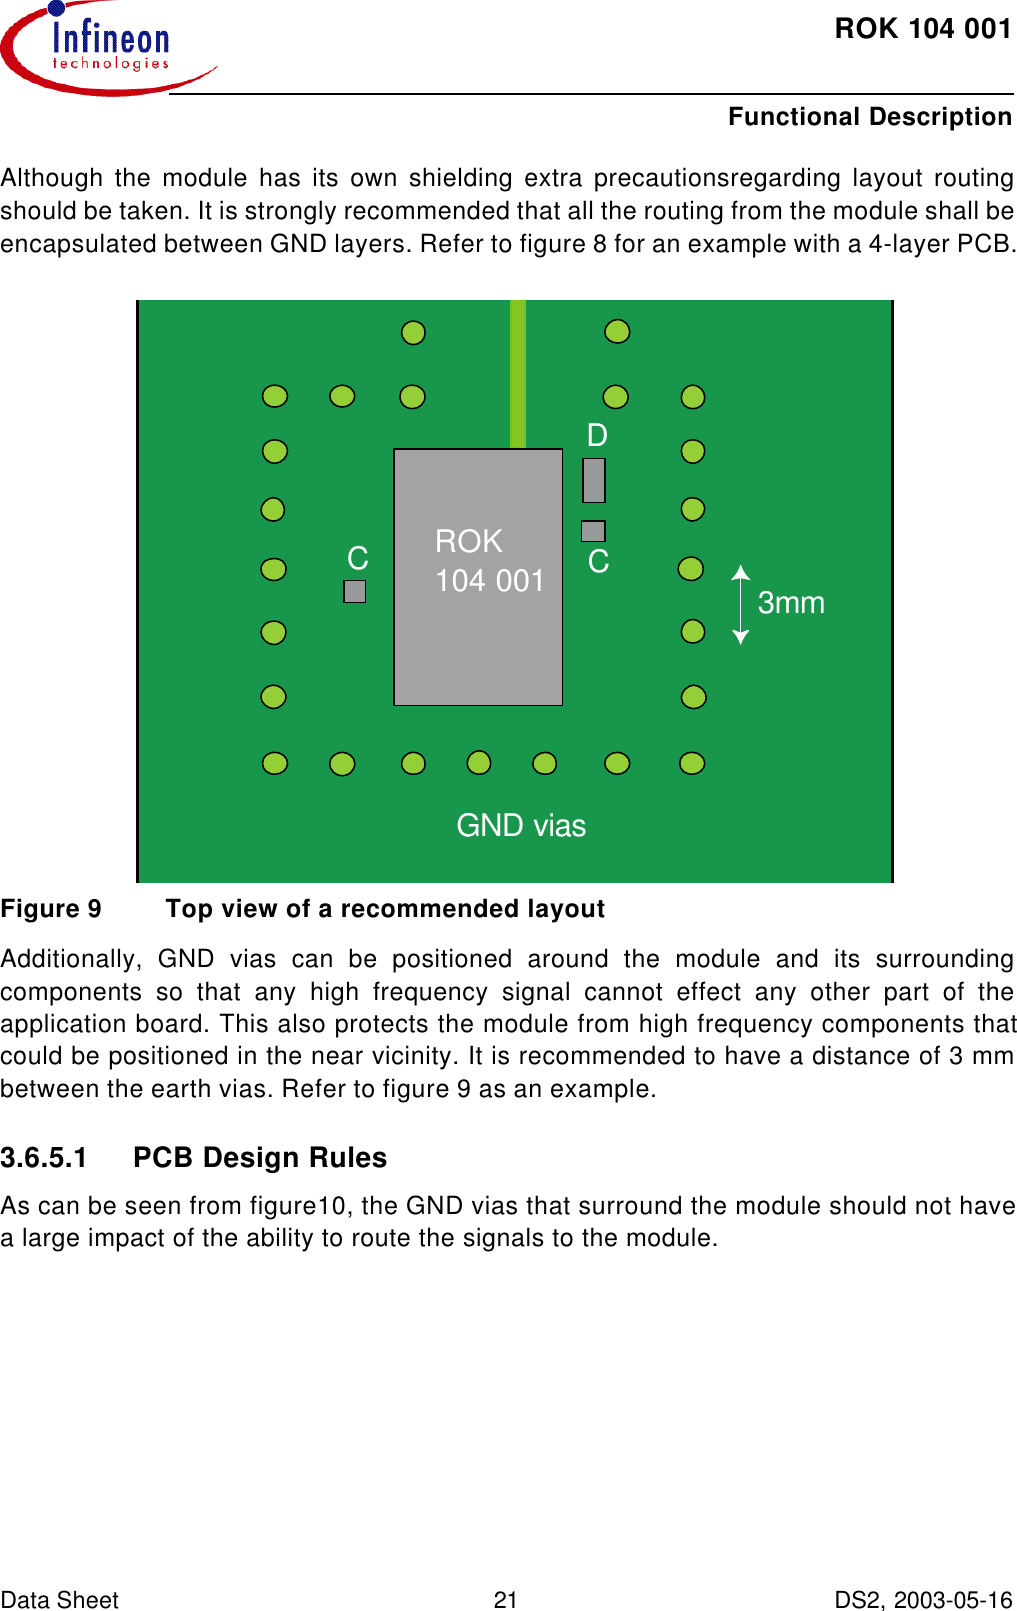 ROK104001Functional Description Data Sheet 21 DS2, 2003-05-16  Although the module has its own shielding extra precautionsregarding layout routingshould be taken. It is strongly recommended that all the routing from the module shall beencapsulated between GND layers. Refer to figure 8 for an example with a 4-layer PCB.Figure9 Top view of a recommended layoutAdditionally, GND vias can be positioned around the module and its surroundingcomponents so that any high frequency signal cannot effect any other part of theapplication board. This also protects the module from high frequency components thatcould be positioned in the near vicinity. It is recommended to have a distance of 3 mmbetween the earth vias. Refer to figure 9 as an example.3.6.5.1 PCB Design RulesAs can be seen from figure10, the GND vias that surround the module should not havea large impact of the ability to route the signals to the module.3mmROK104 001CCDGND vias